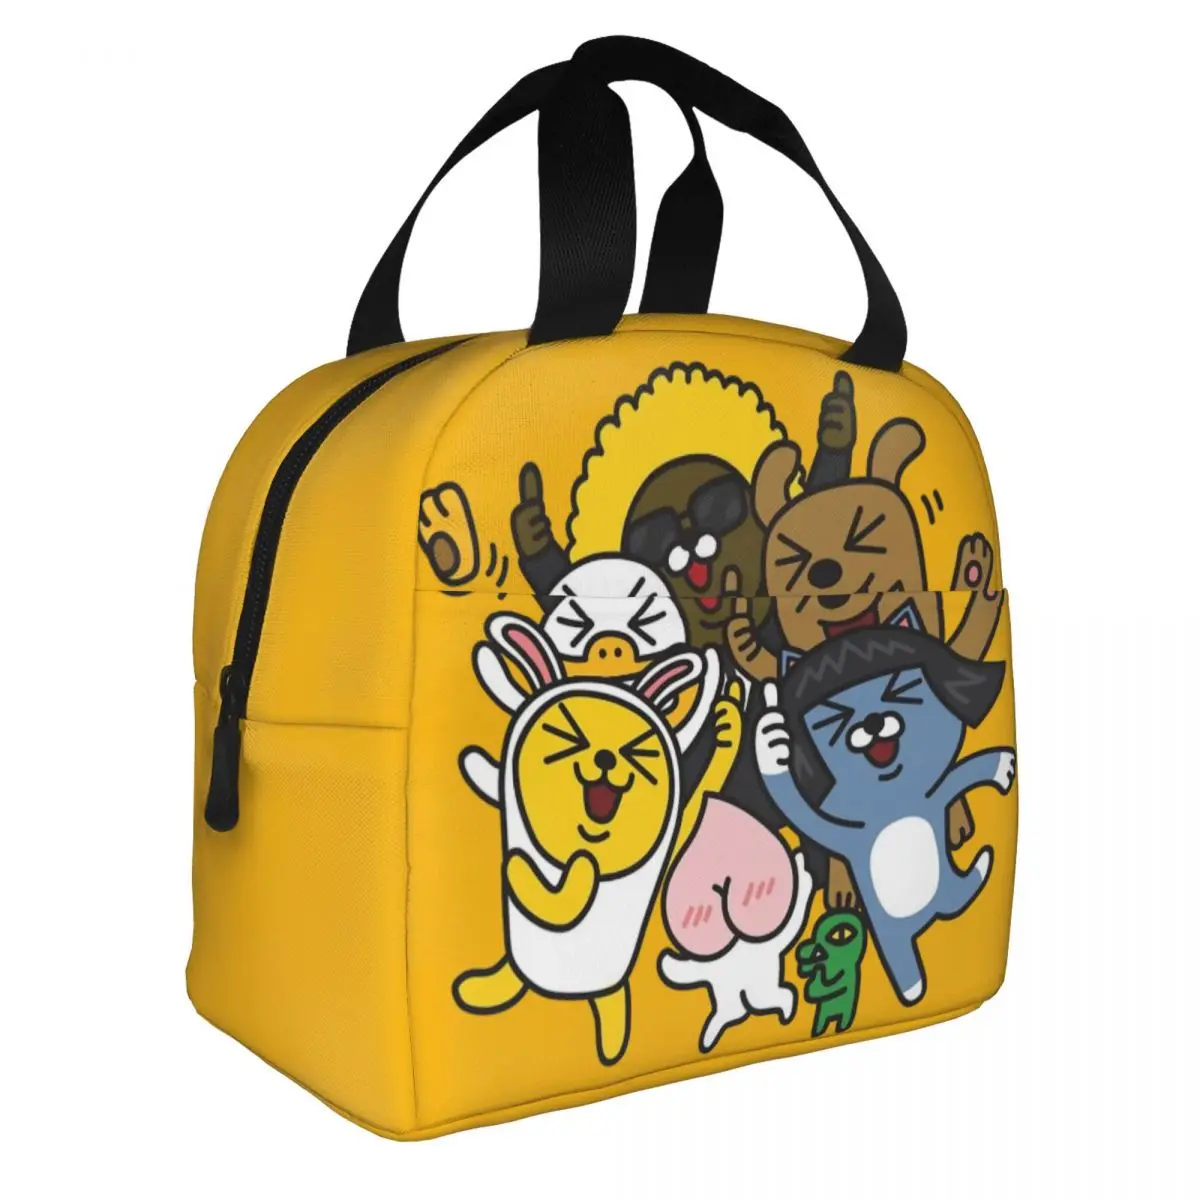 

Kakao Friends Insulated Lunch Bags Large Meal Container Thermal Bag Tote Lunch Box Beach Outdoor Men Women